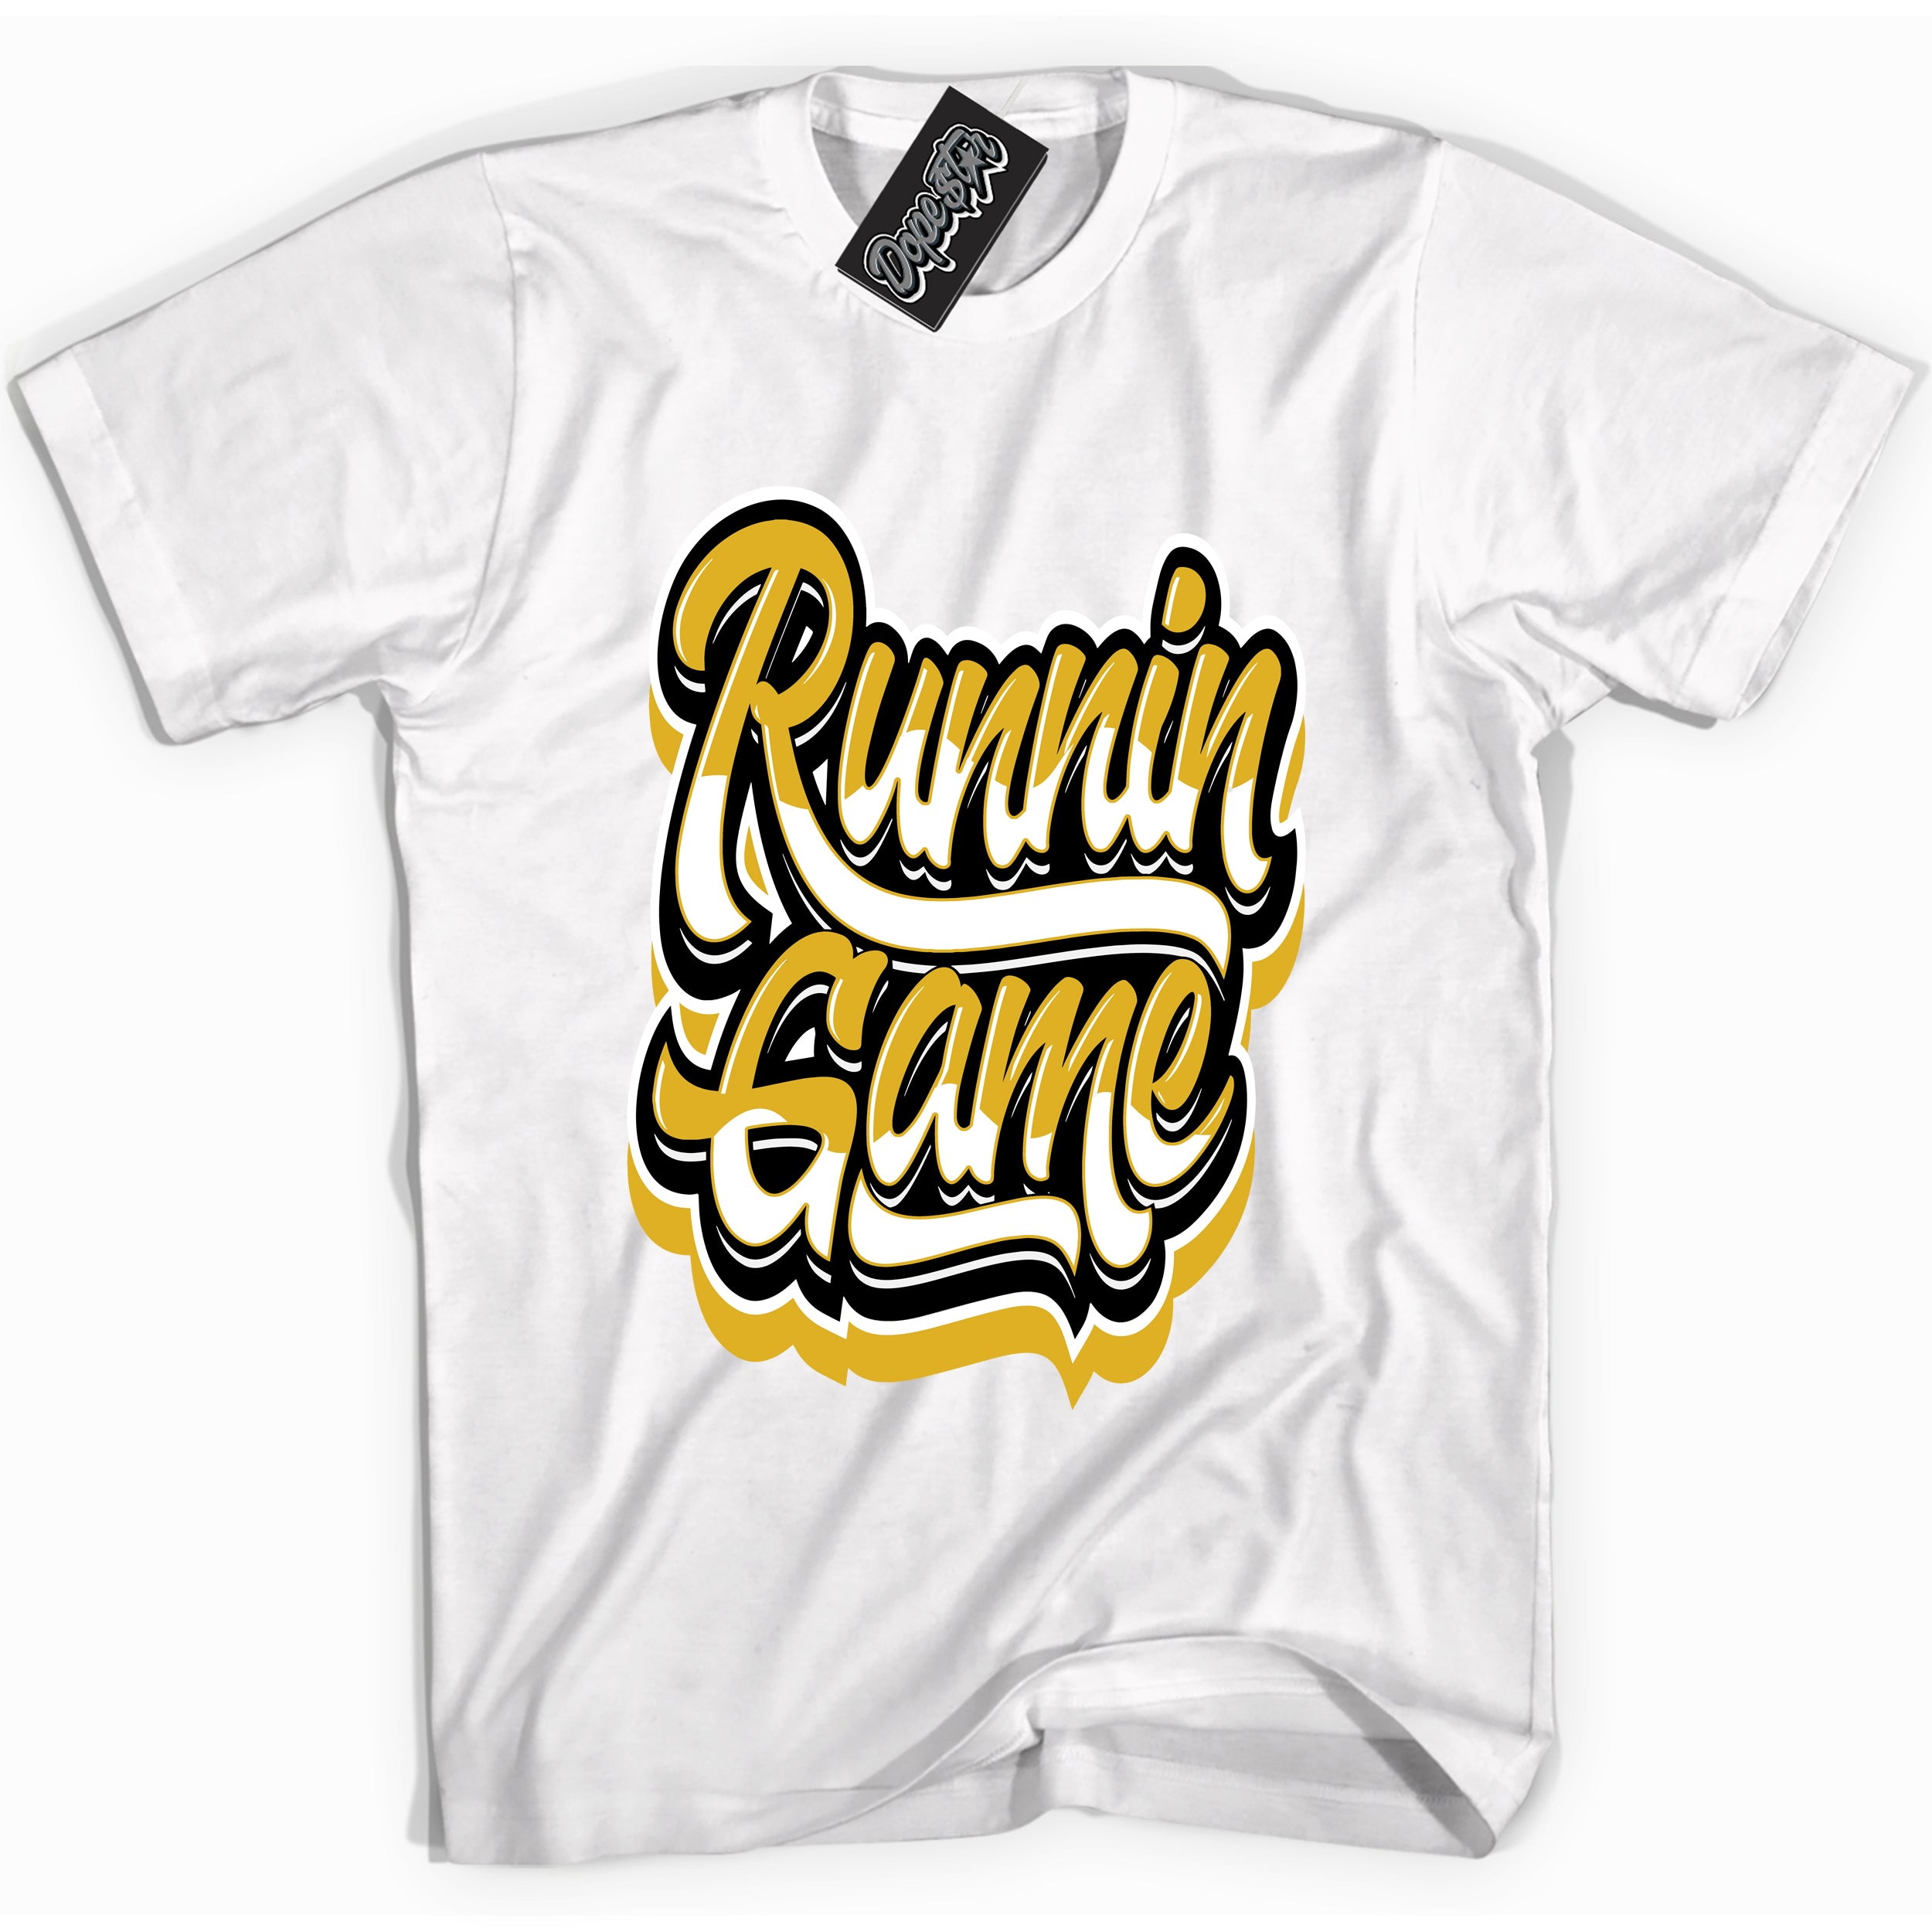 Cool White Shirt with “ Running Game” design that perfectly matches Yellow Ochre 6s Sneakers.